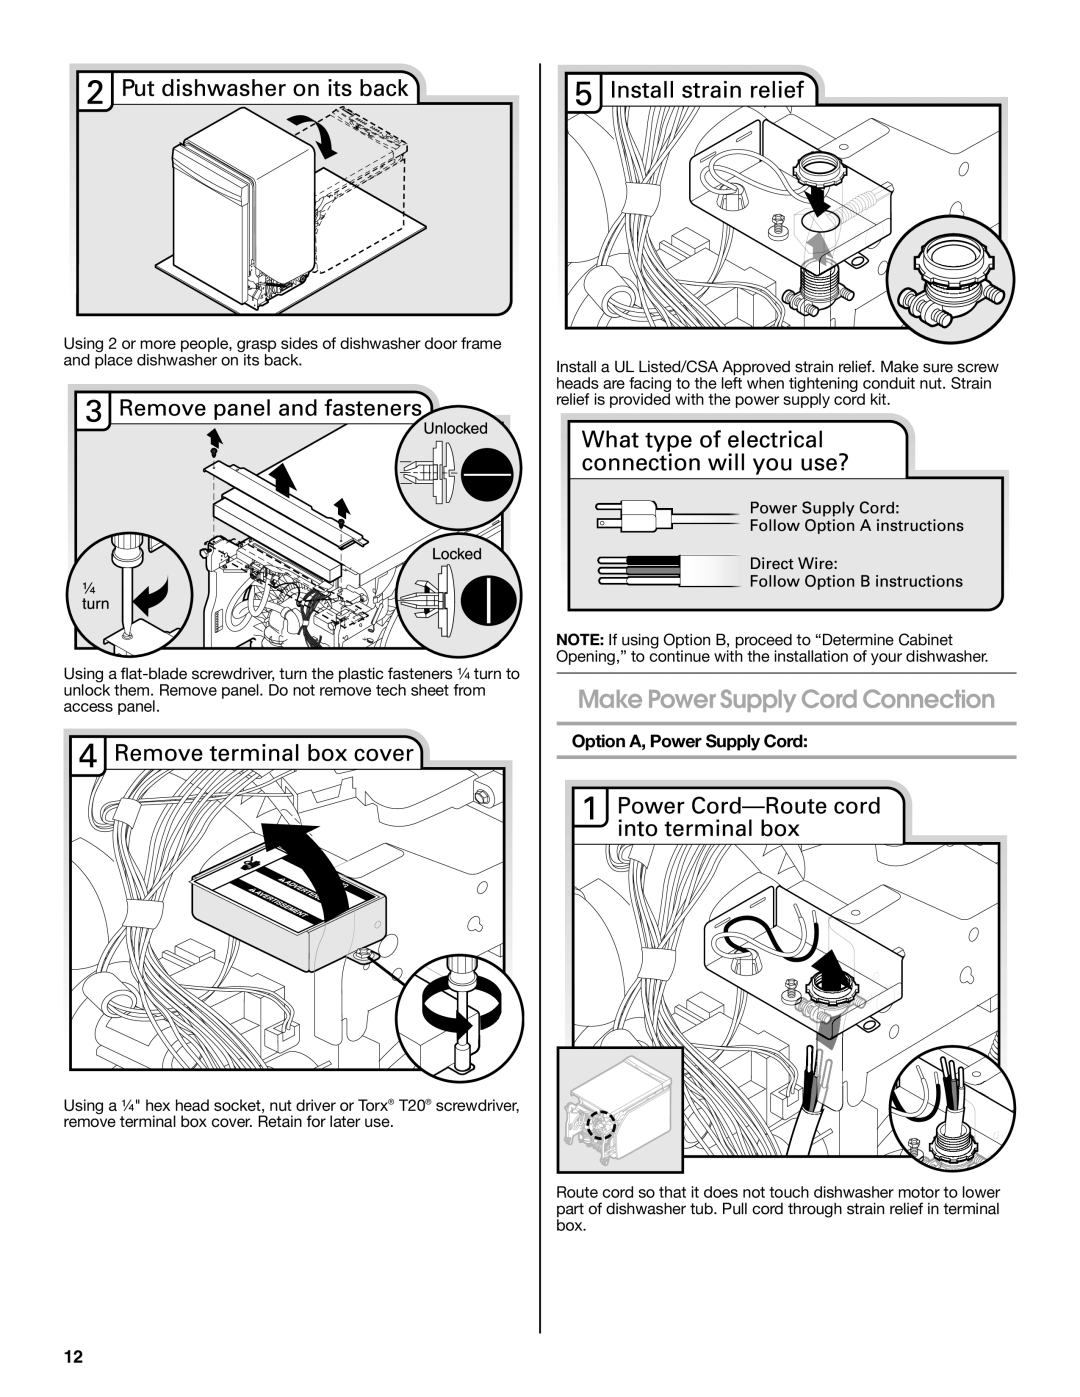 Whirlpool W10435039A installation instructions Make Power Supply Cord Connection, Option A, Power Supply Cord 